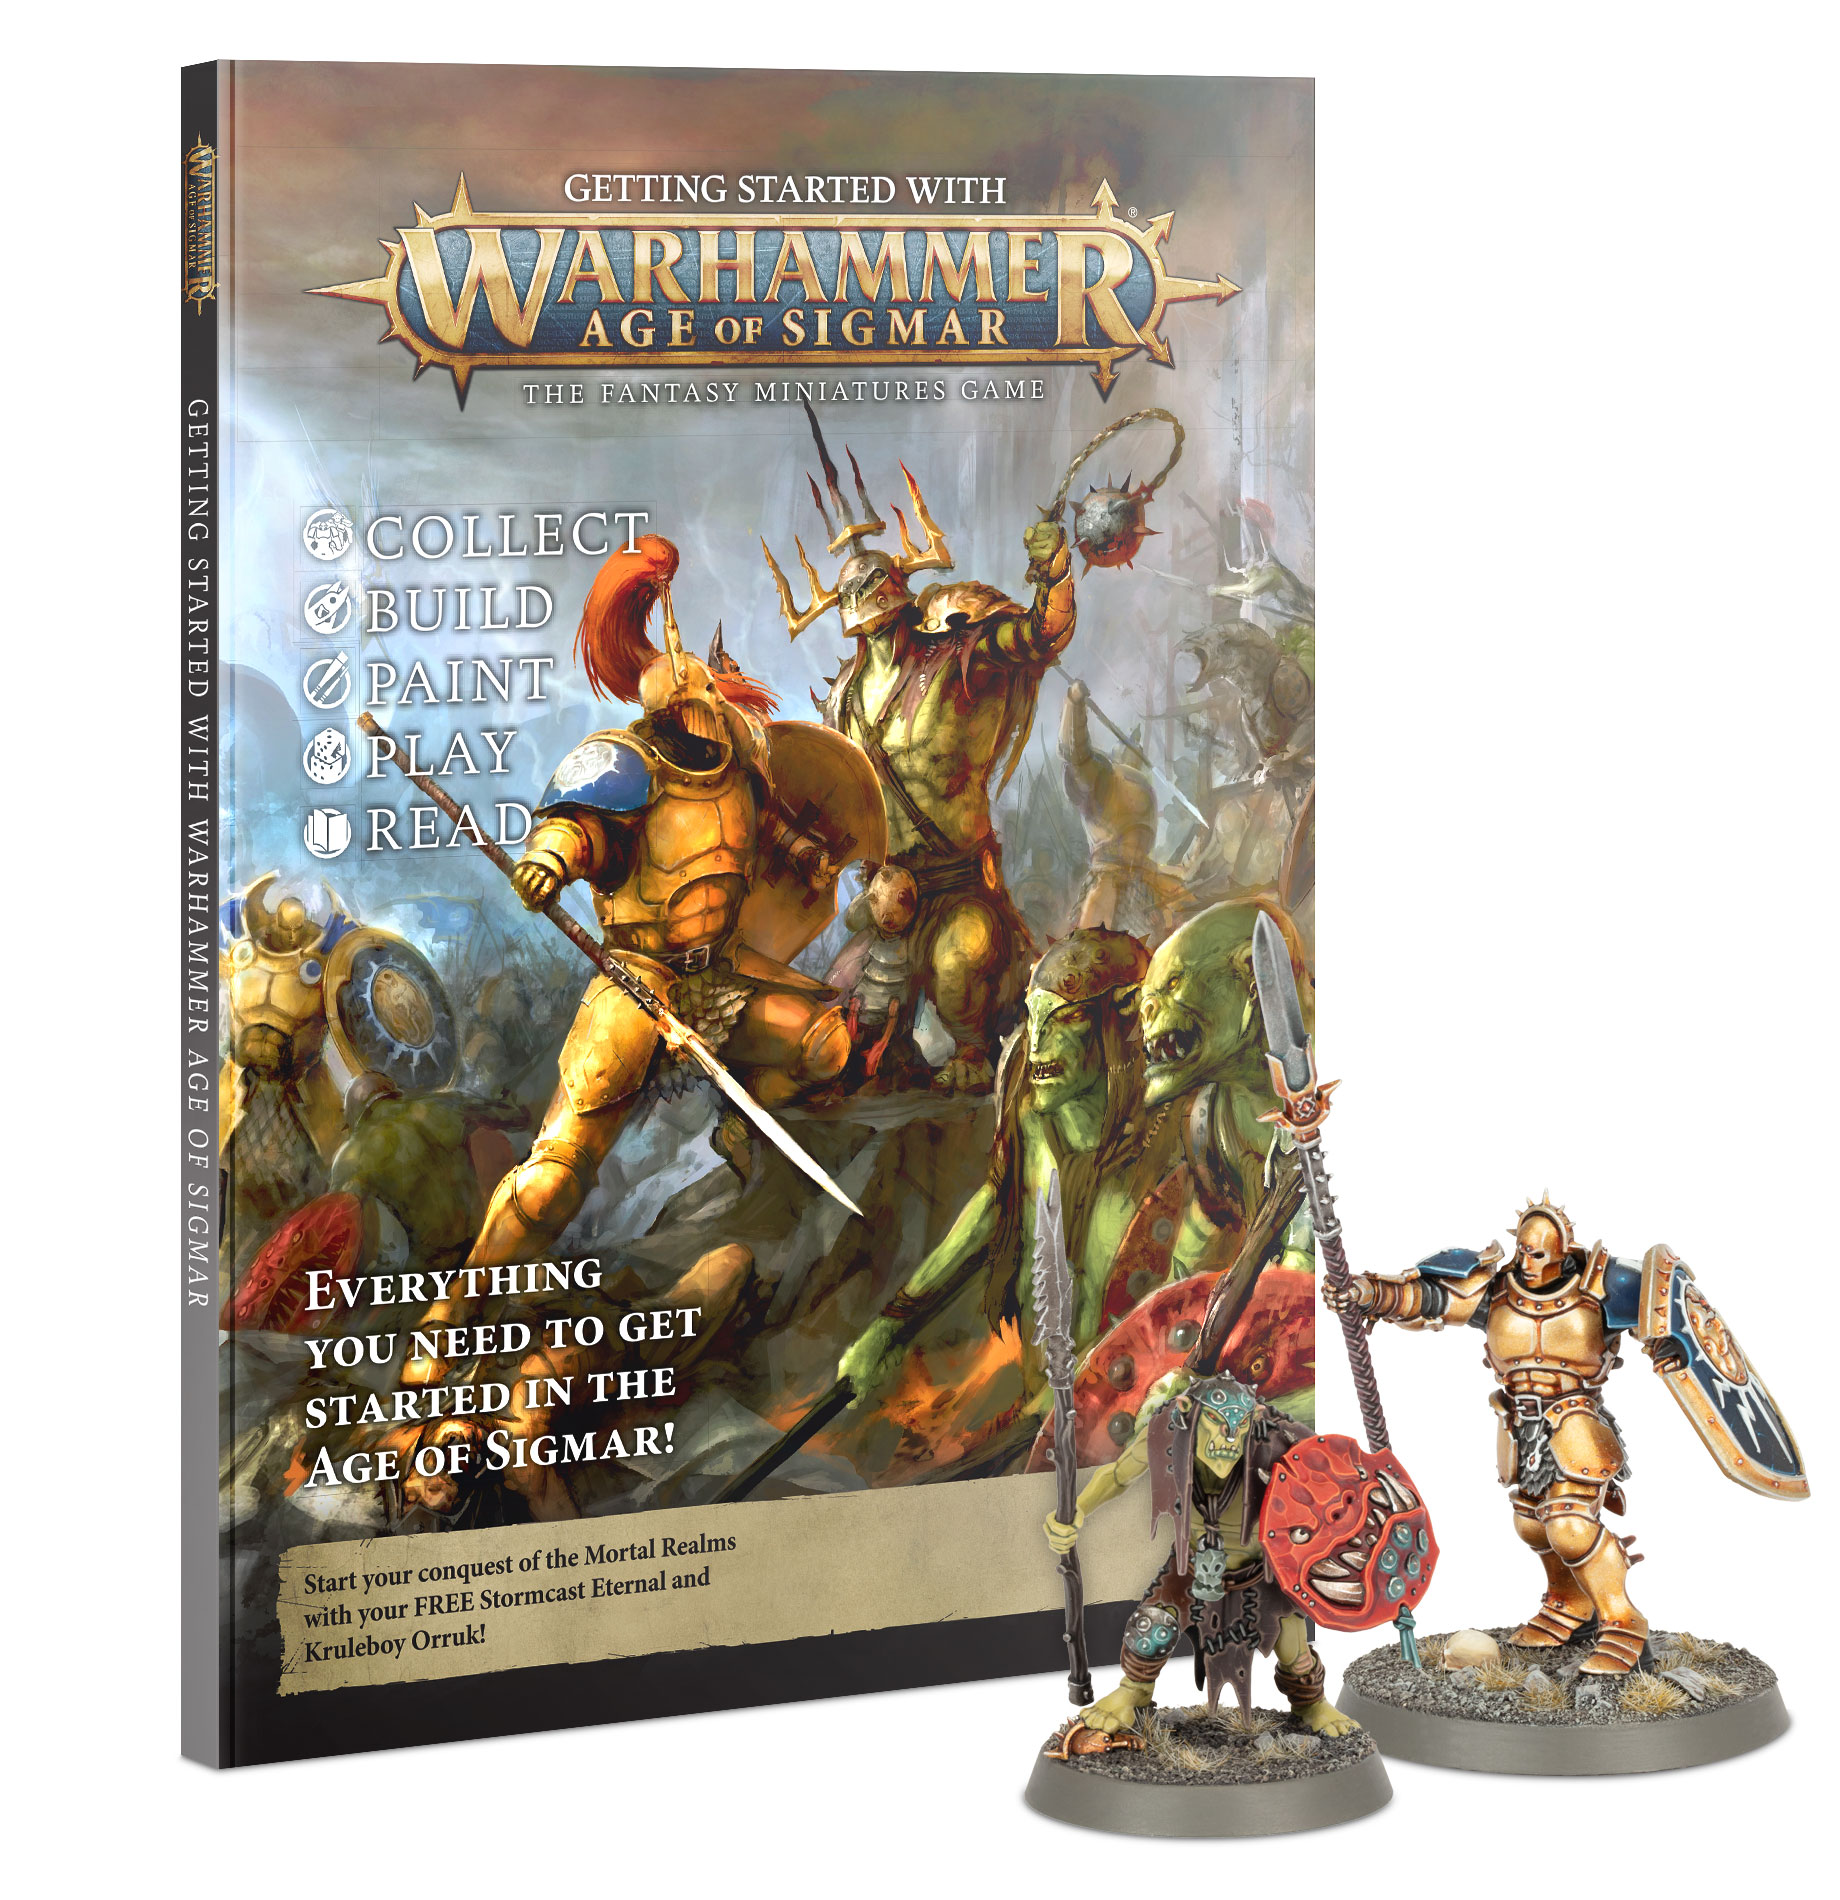 Getting Started With Age of Sigmar 3rd Edition 